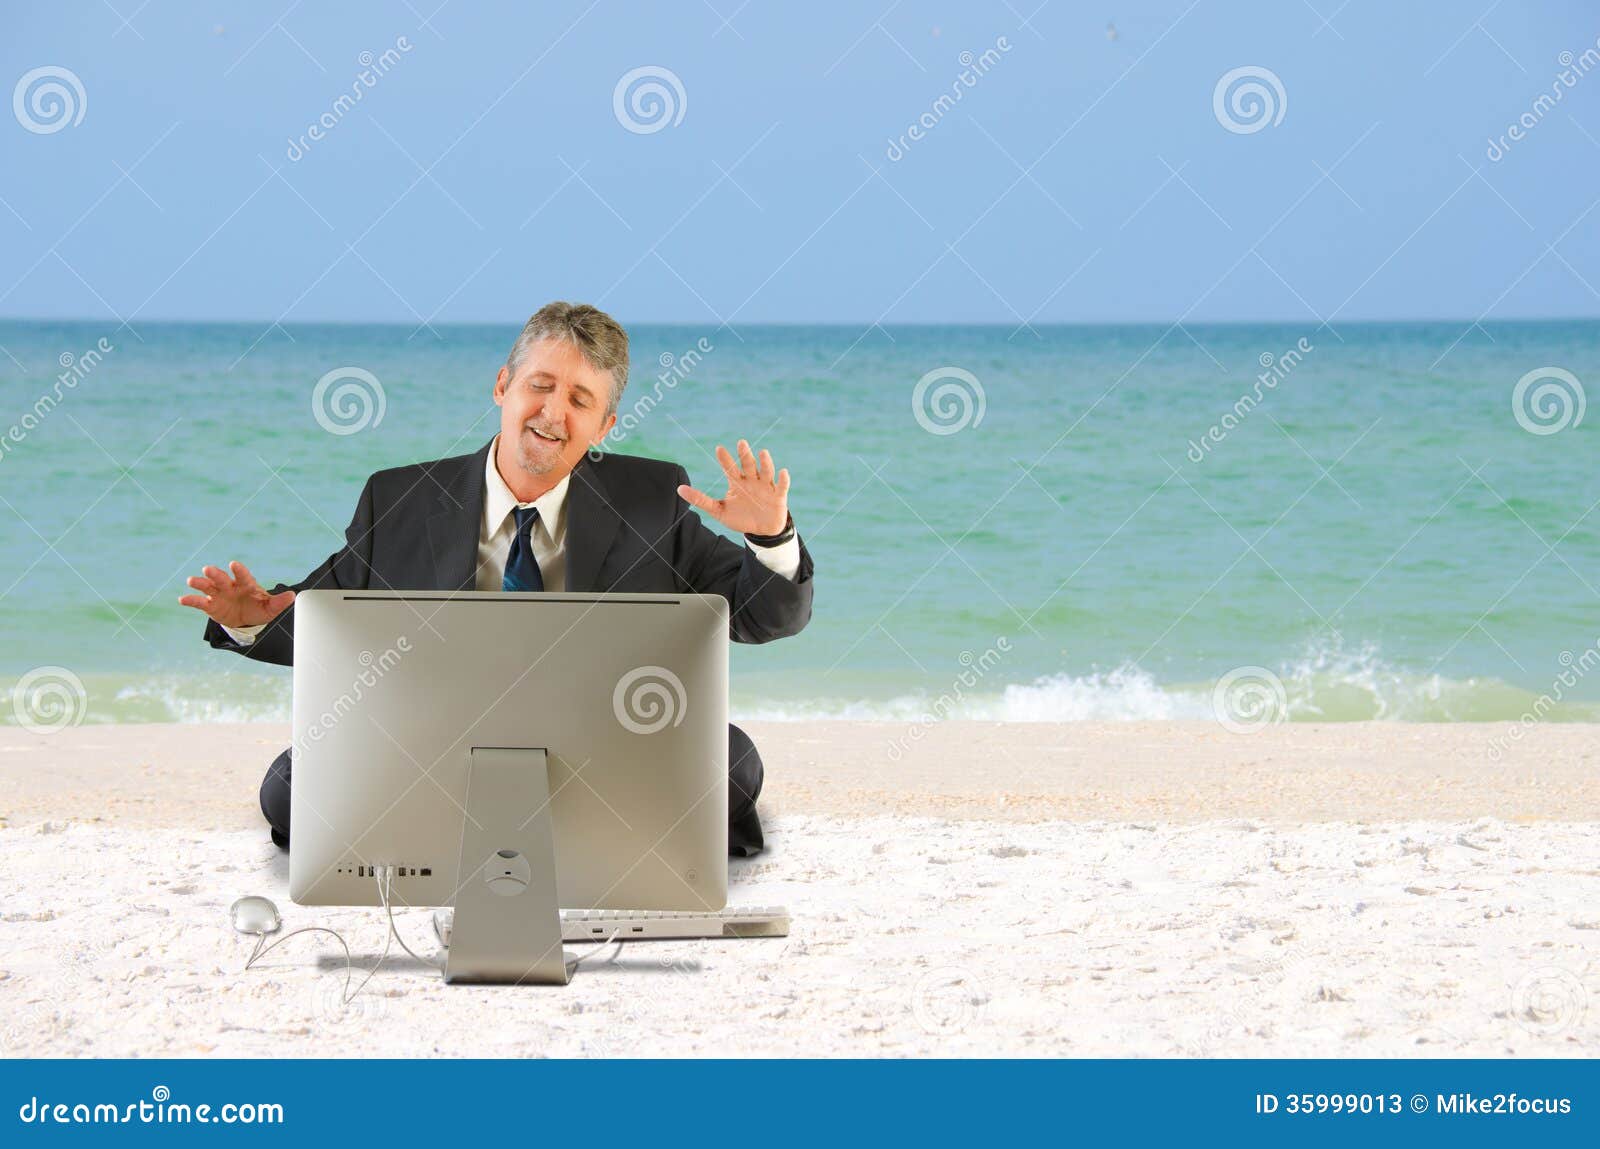 Business Man on the Beach with a Computer Stock Image - Image of ...